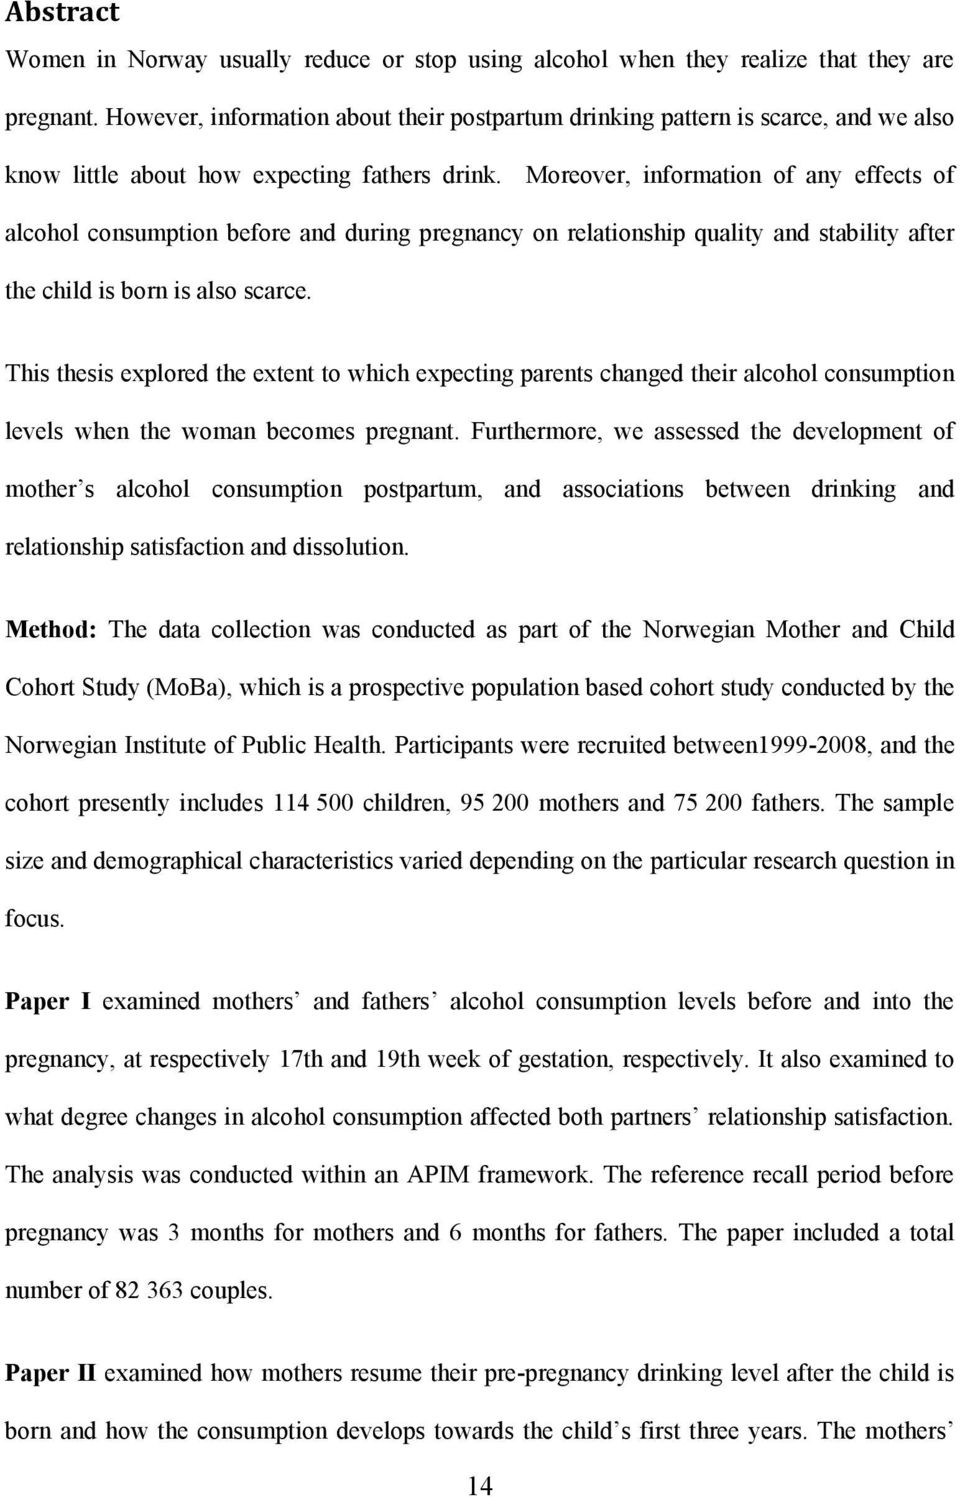 Moreover, information of any effects of alcohol consumption before and during pregnancy on relationship quality and stability after the child is born is also scarce.